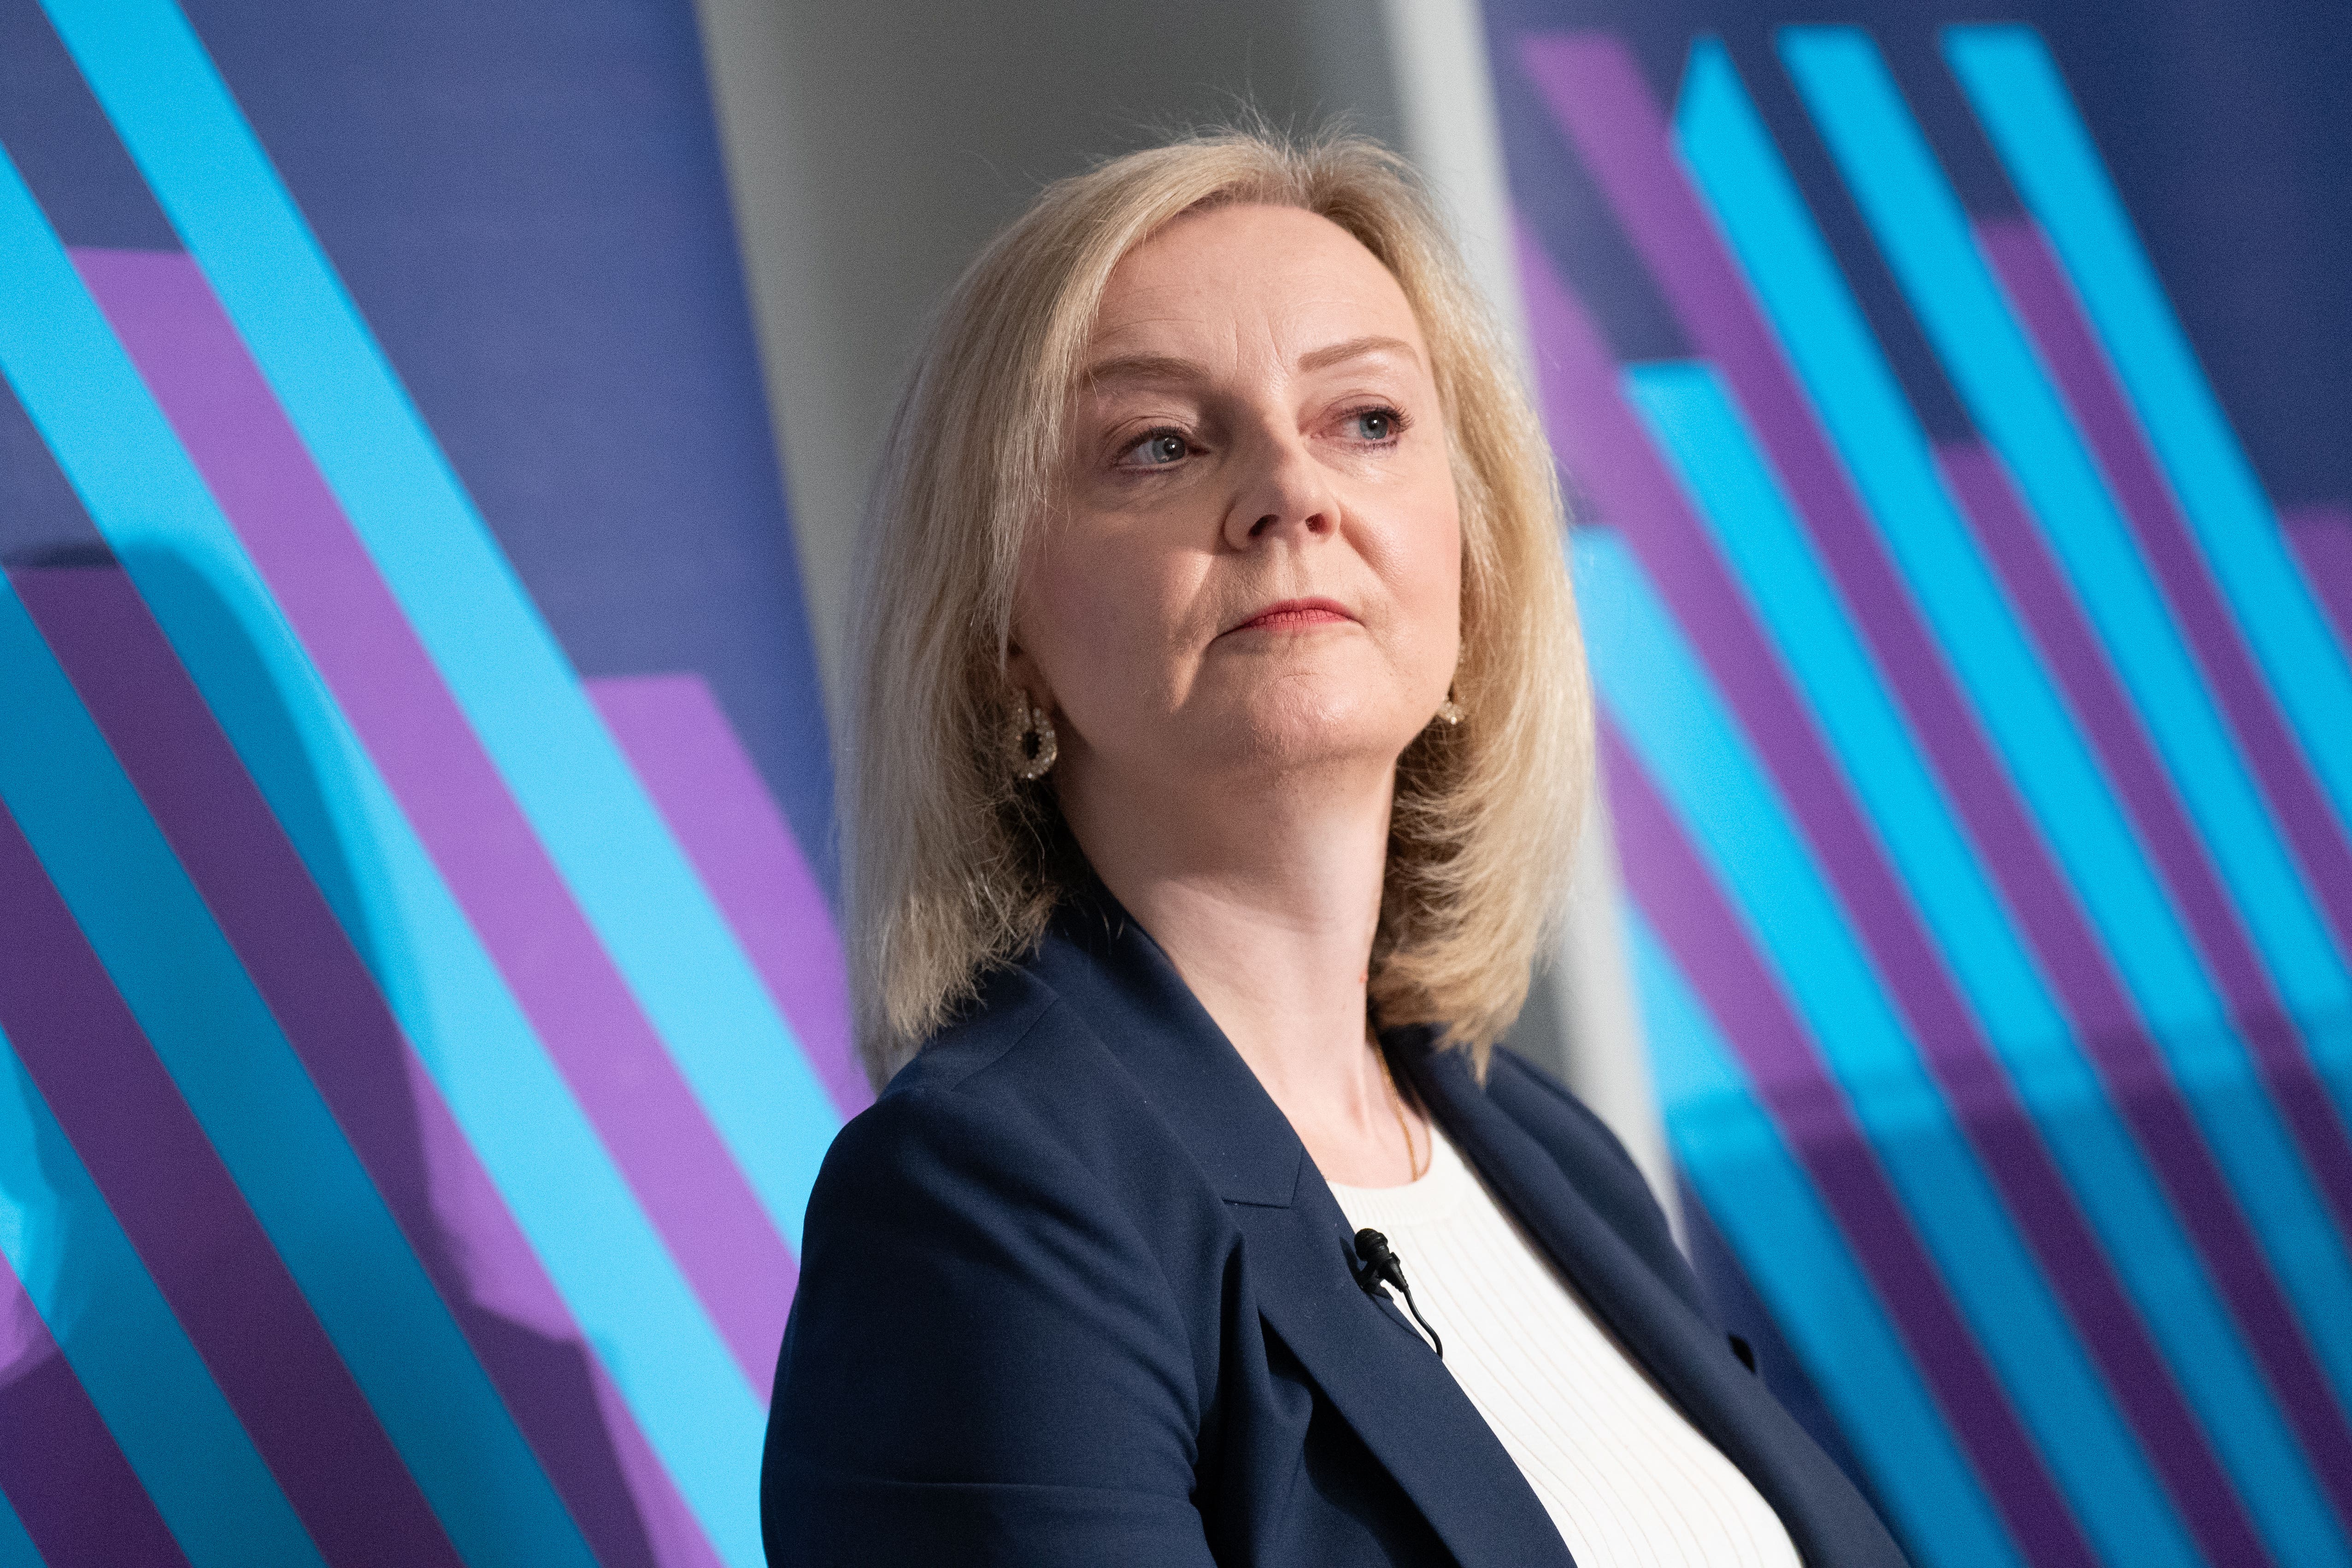 Liz Truss, the Lady Jane Grey of British prime ministers